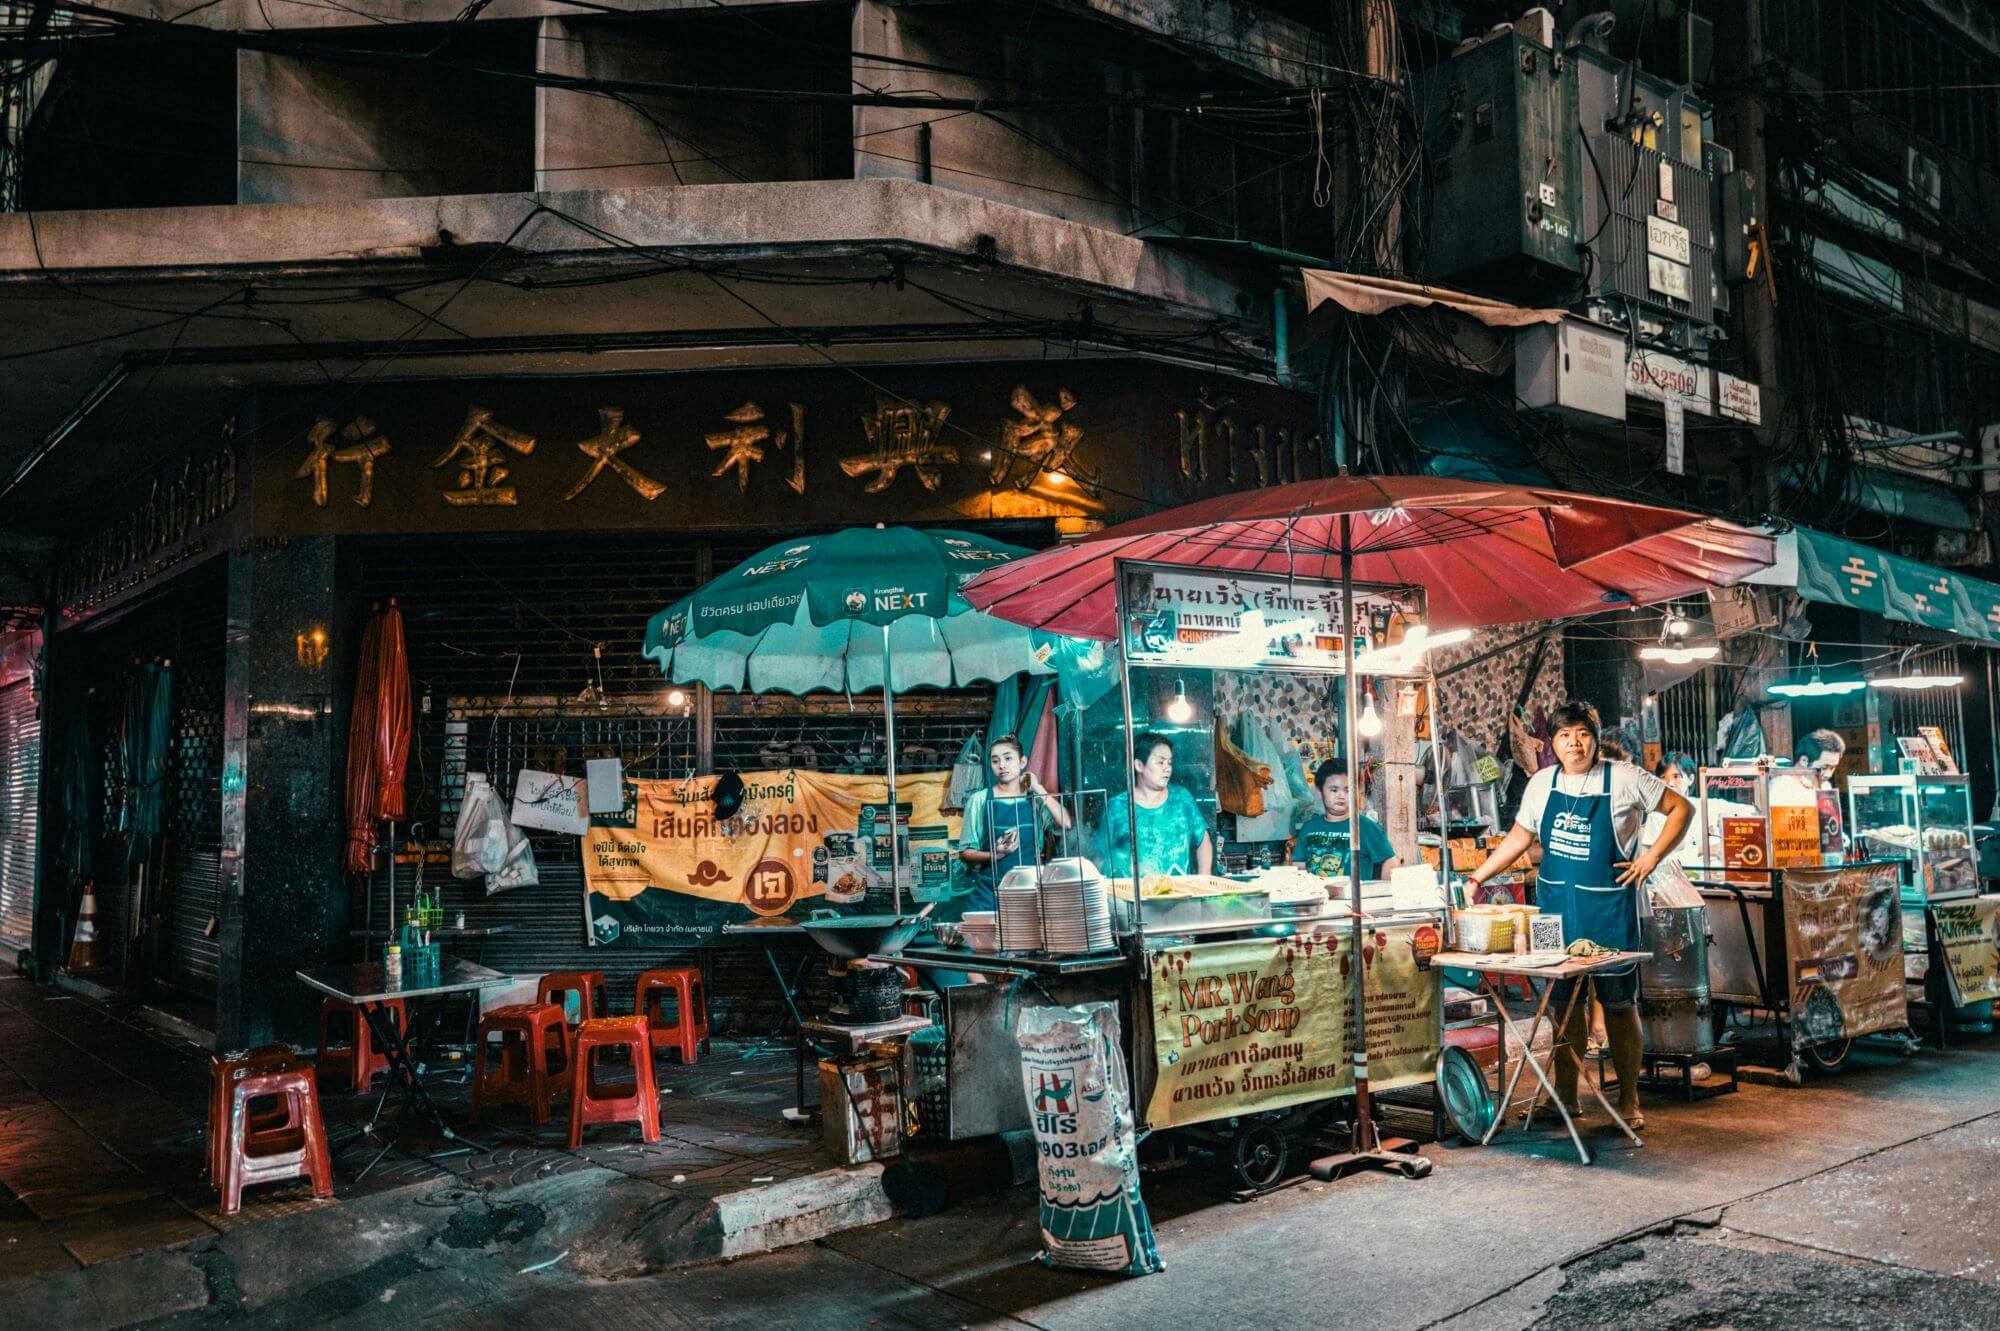 stalls in a food market in Thailand during nighttime